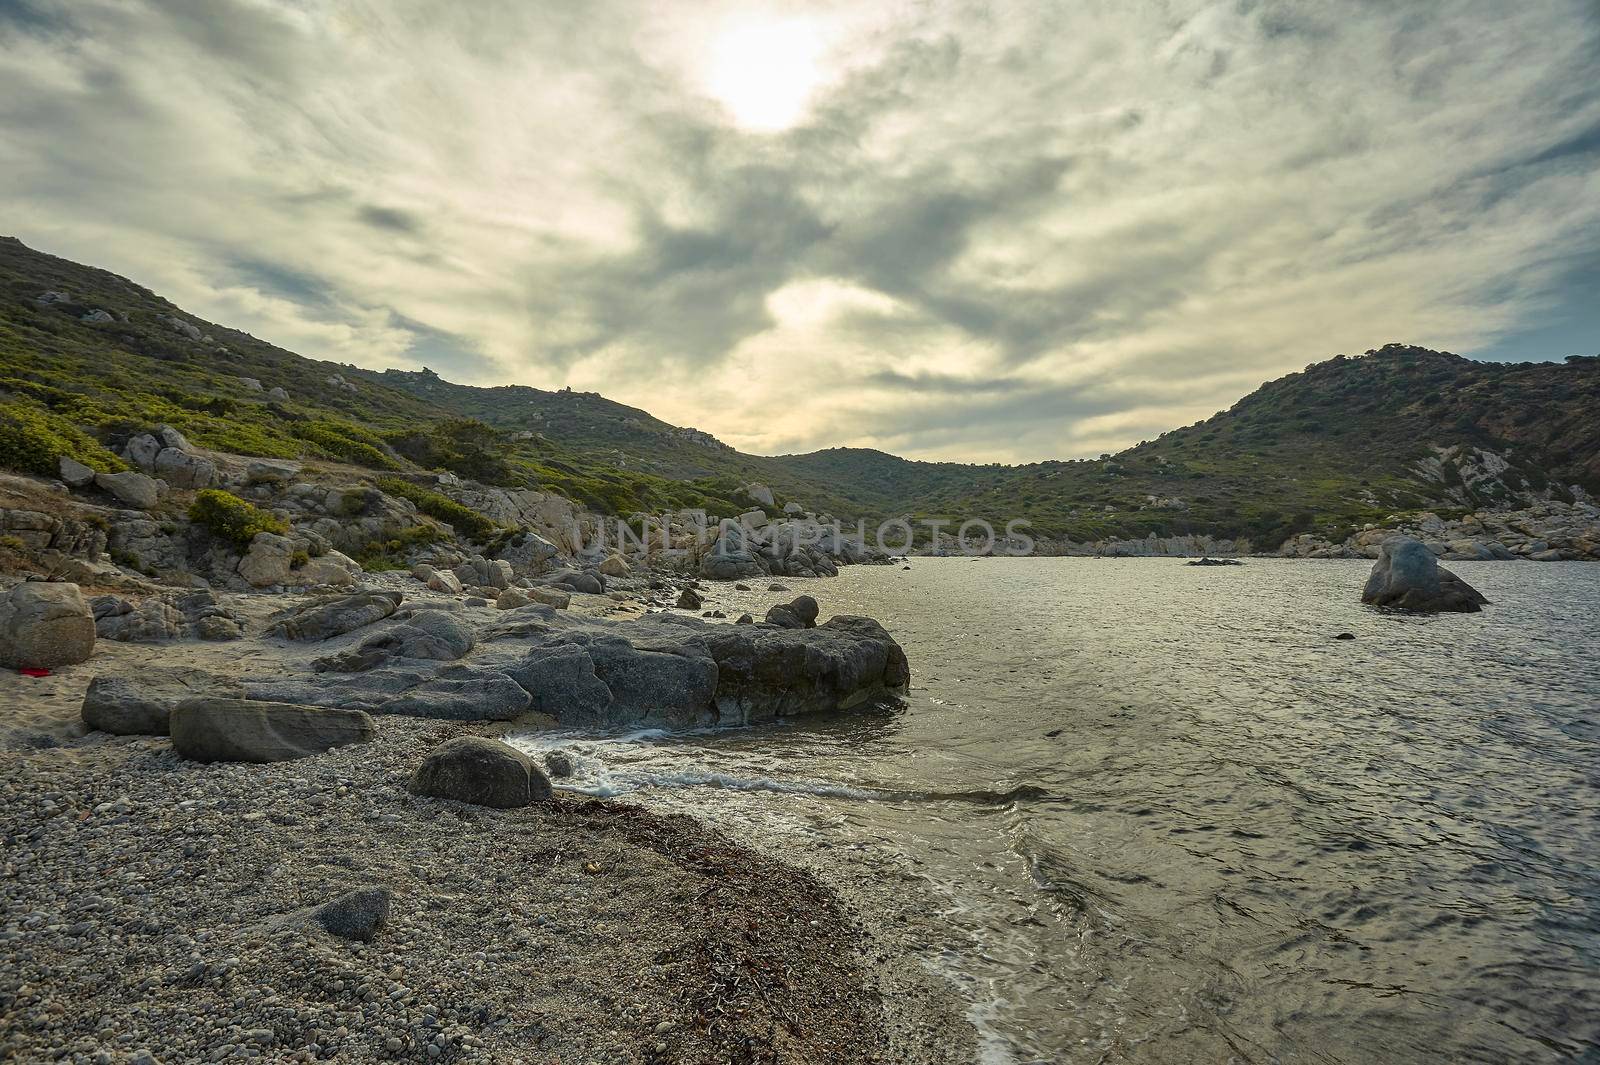 Seascape at sunset containing a magnificent Mediterranean beach with rocky headlands and mountains under a cloudy sky with glimmers of sunshine.